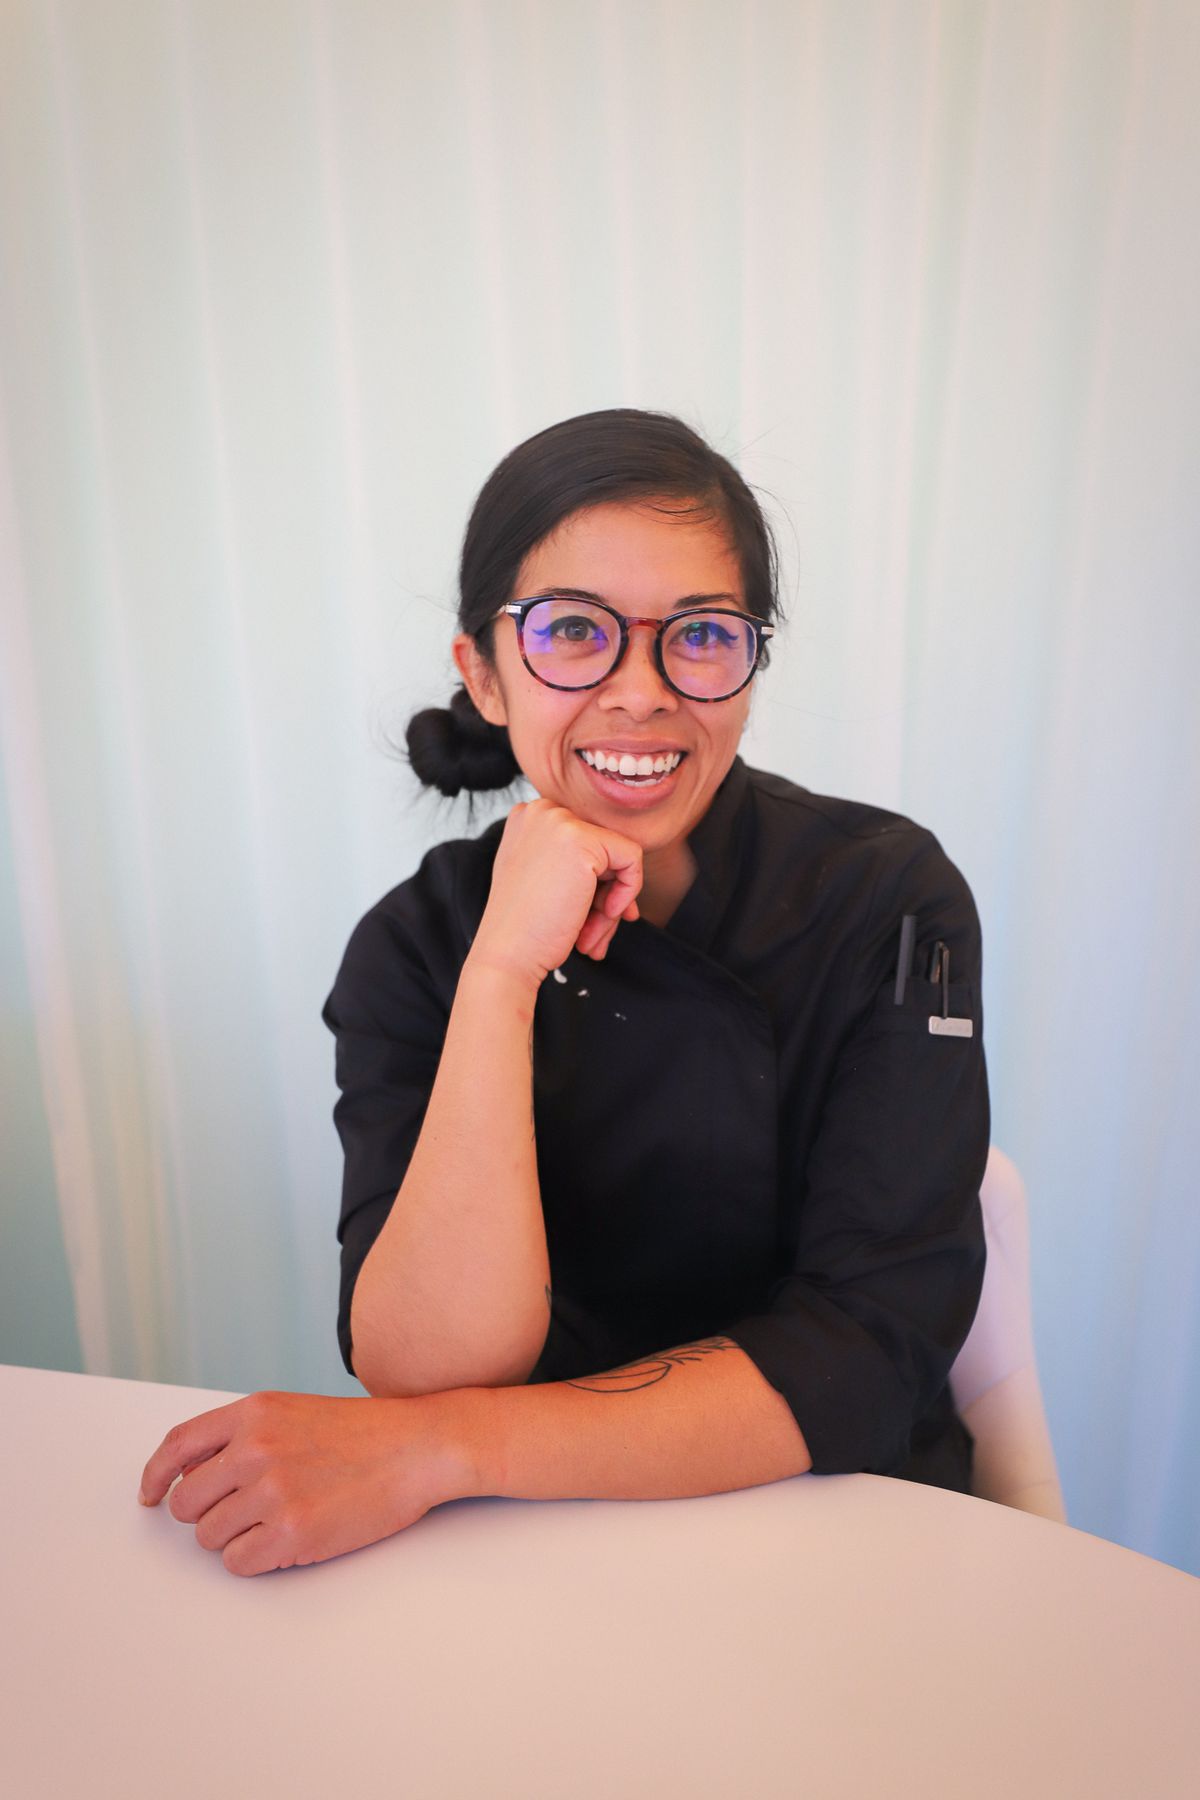 A woman in a black chef’s coat with glasses and hair tied back in a low bun sits at a table and smiles at the camera.